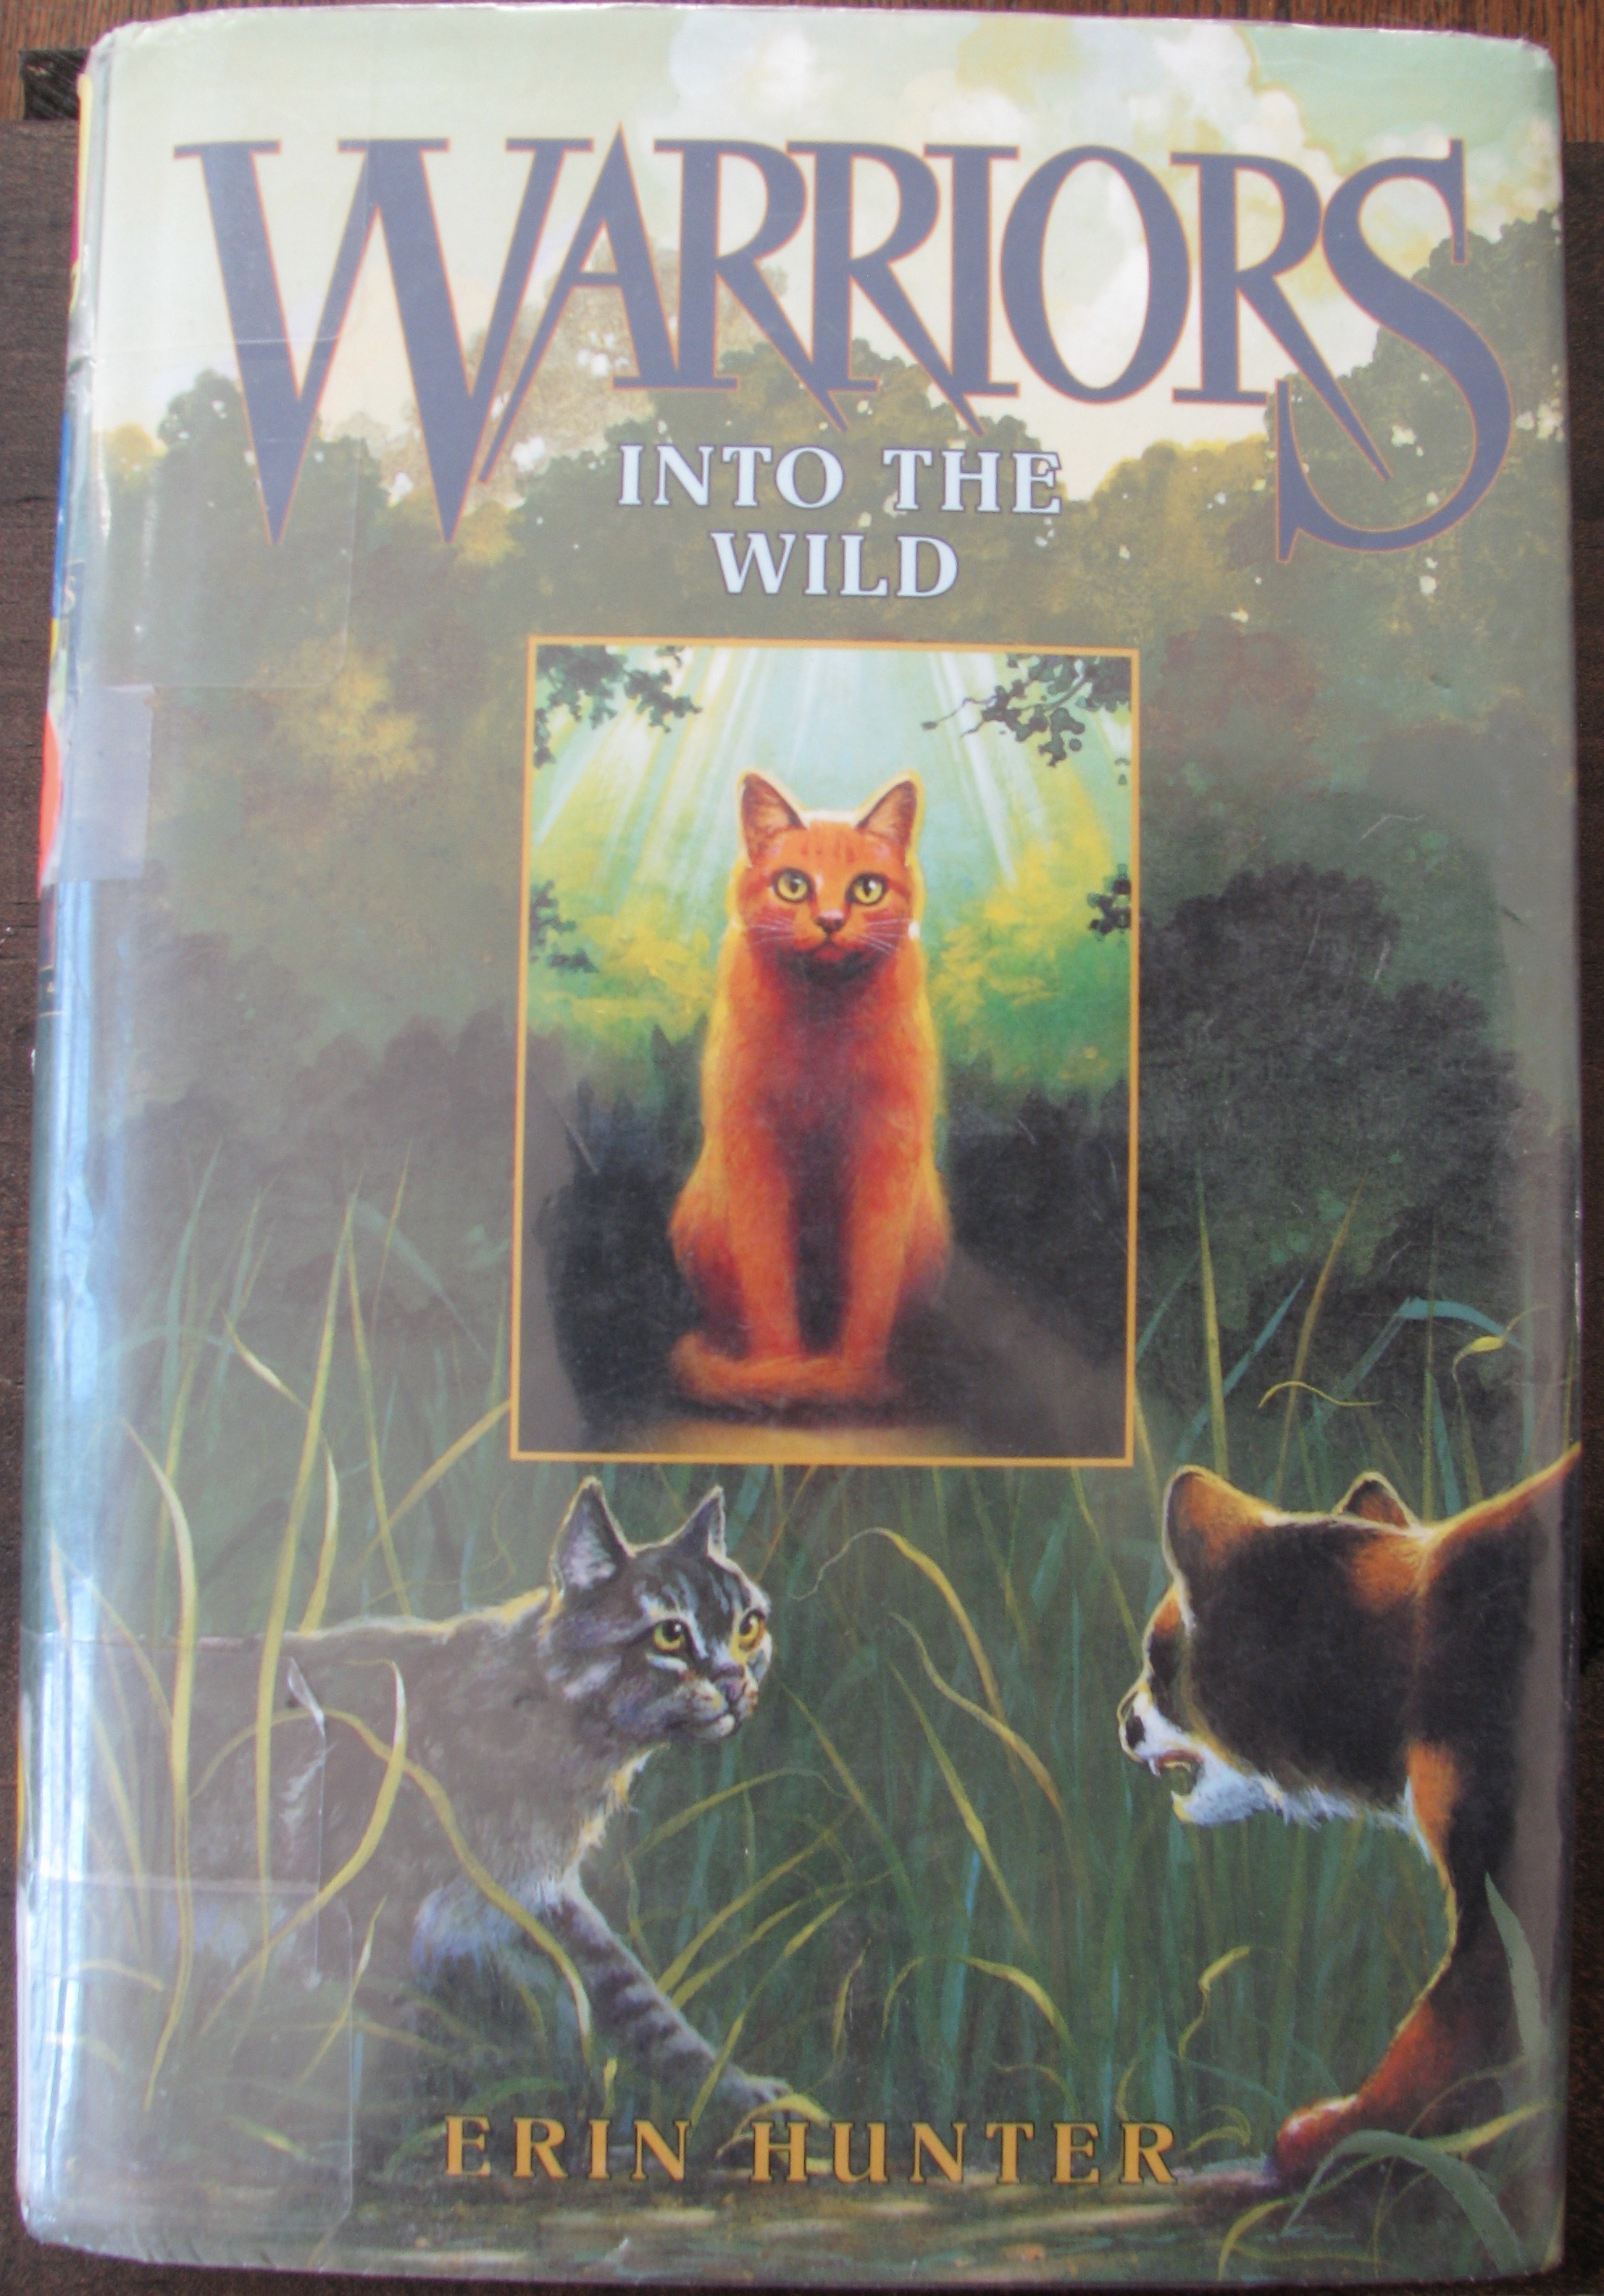 The Warrior Cats Series by Erin Hunter - Cat-Opedia